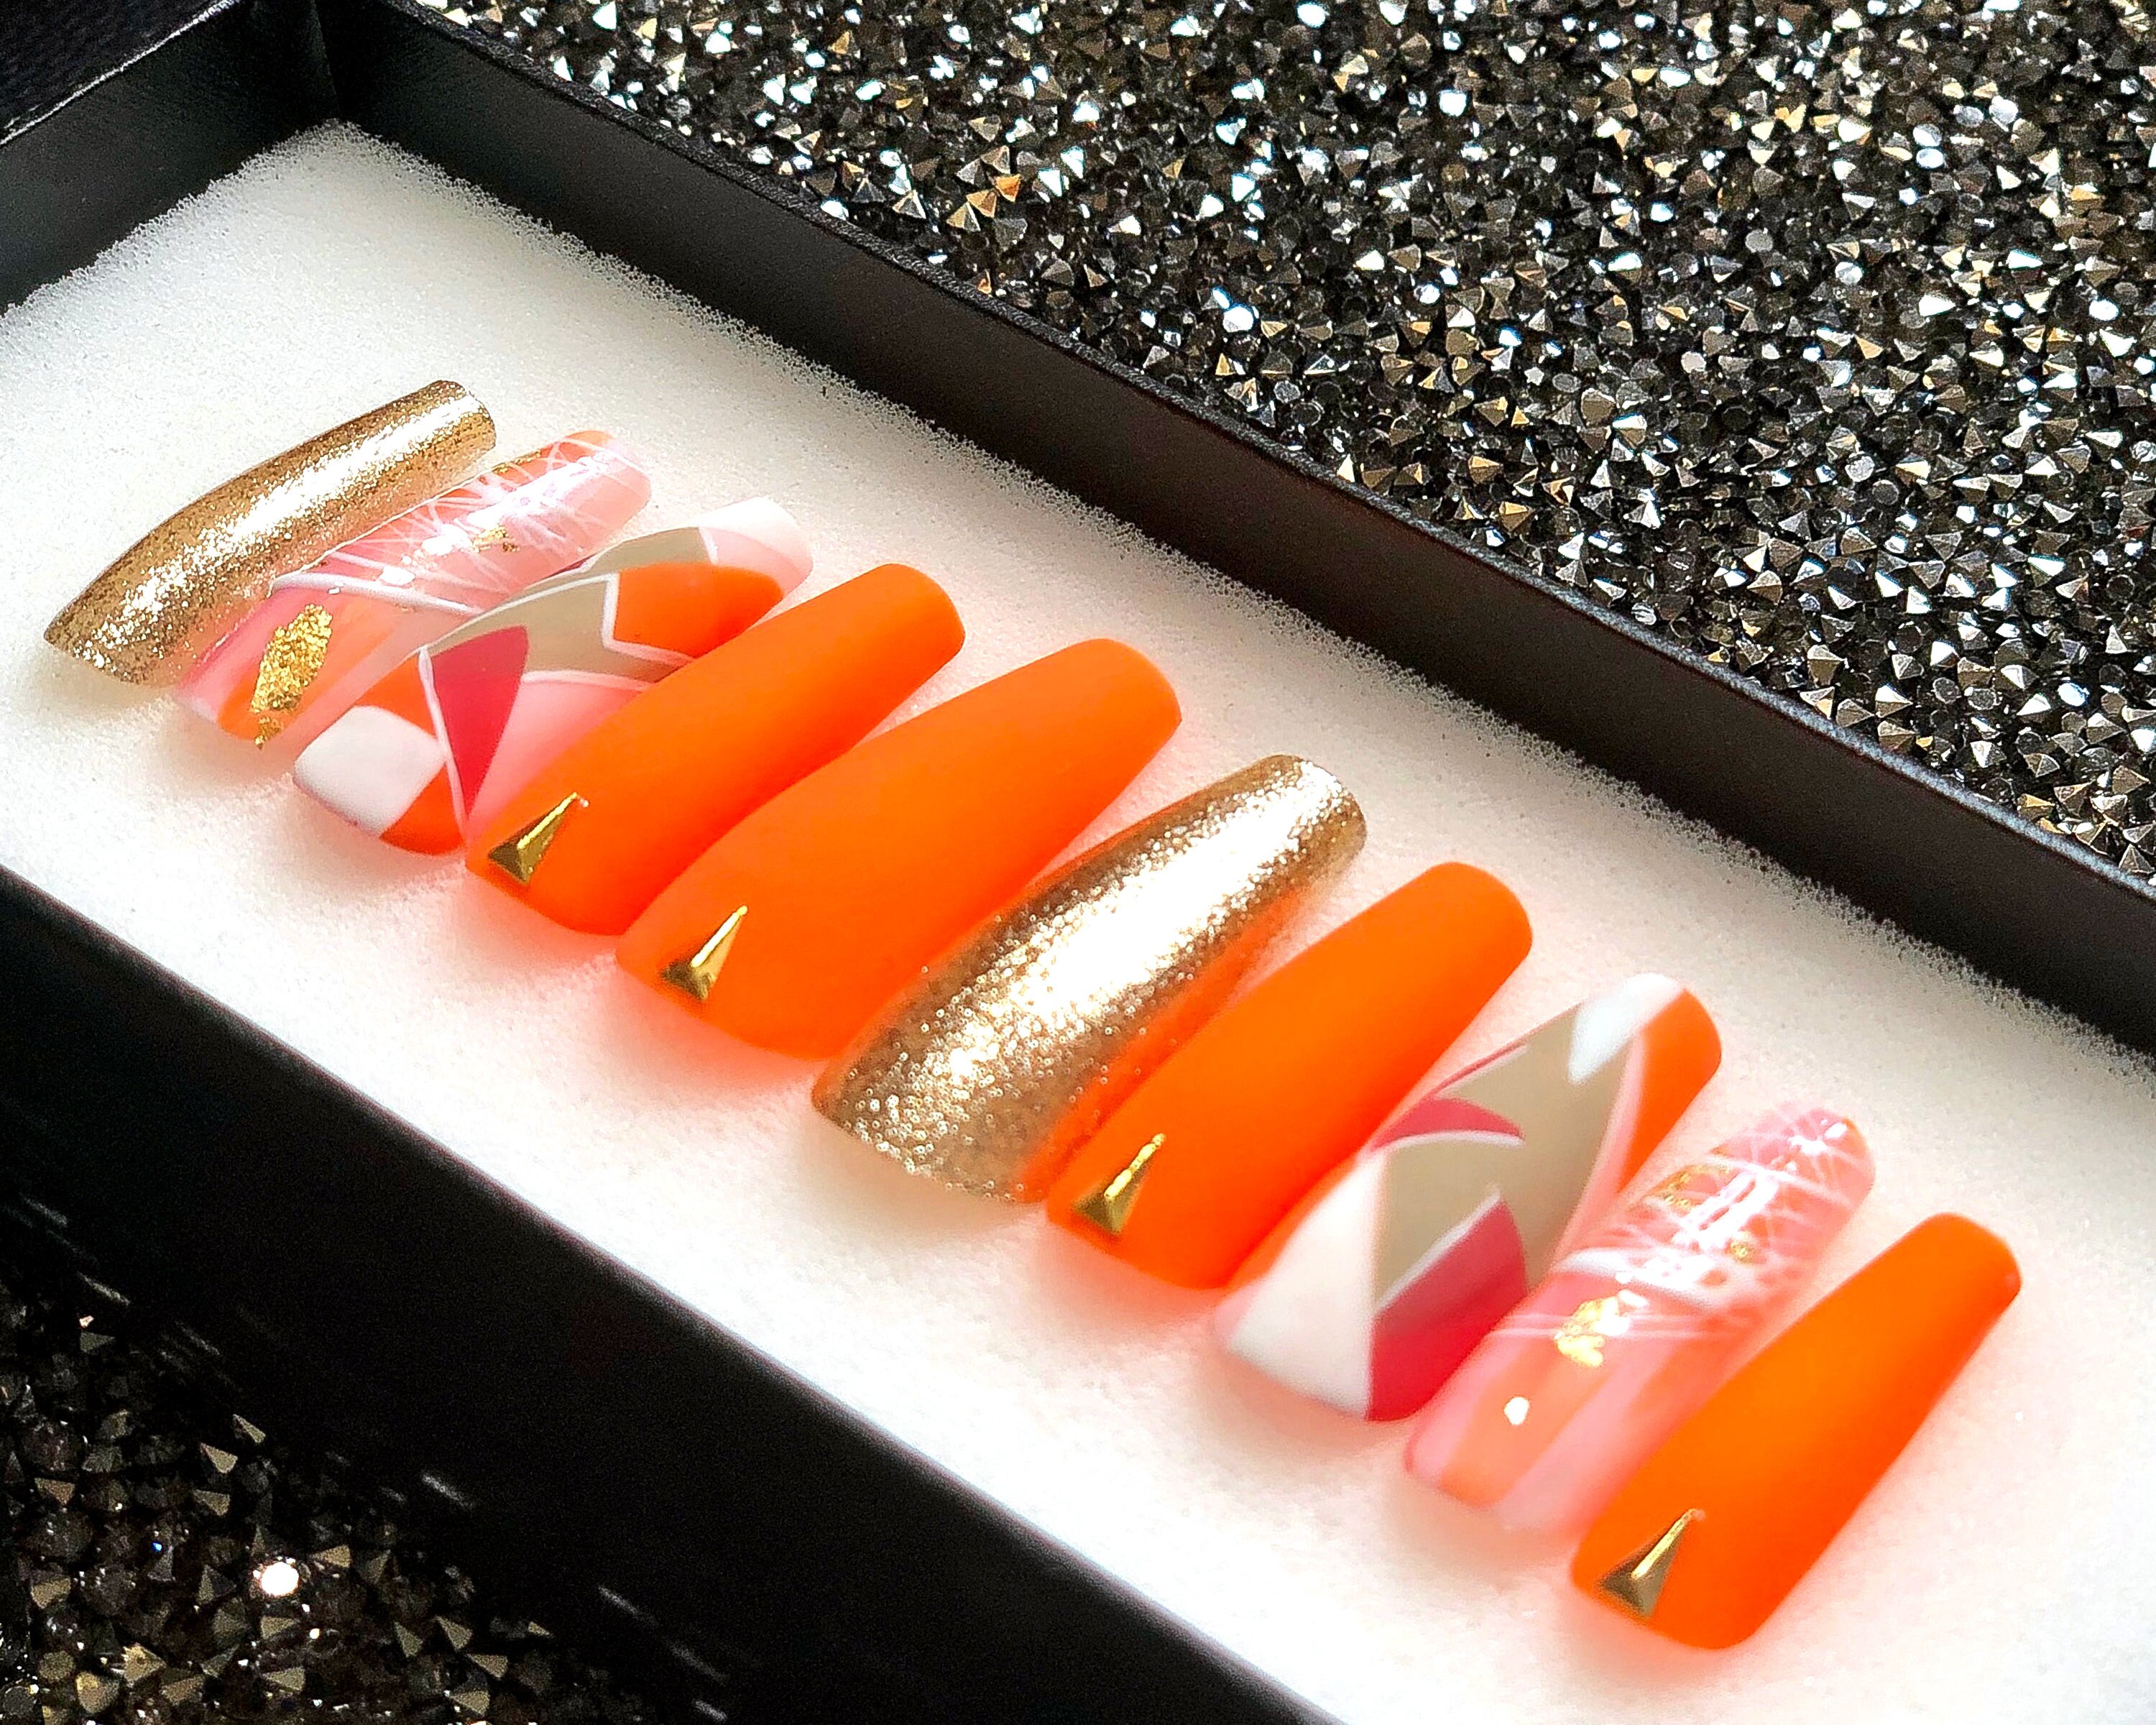 Abstract Glitter Press On Nails Coffin Orange Fake Nails | Etsy